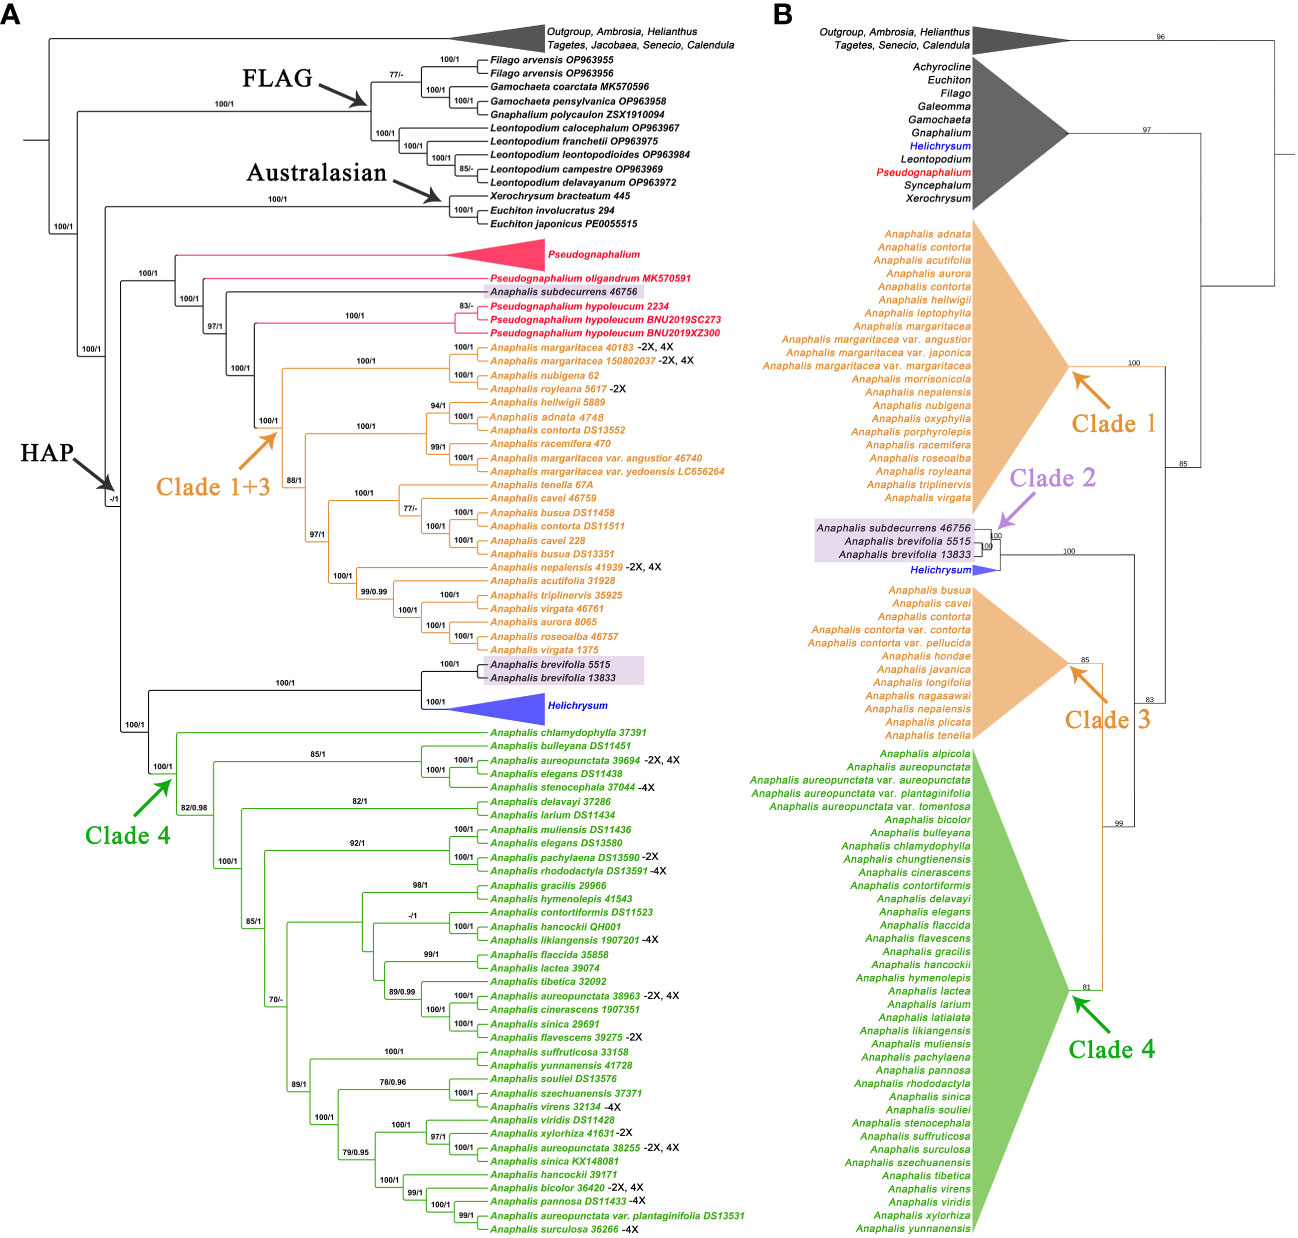 Frontiers | Phylogeny, biogeography, and character evolution of 